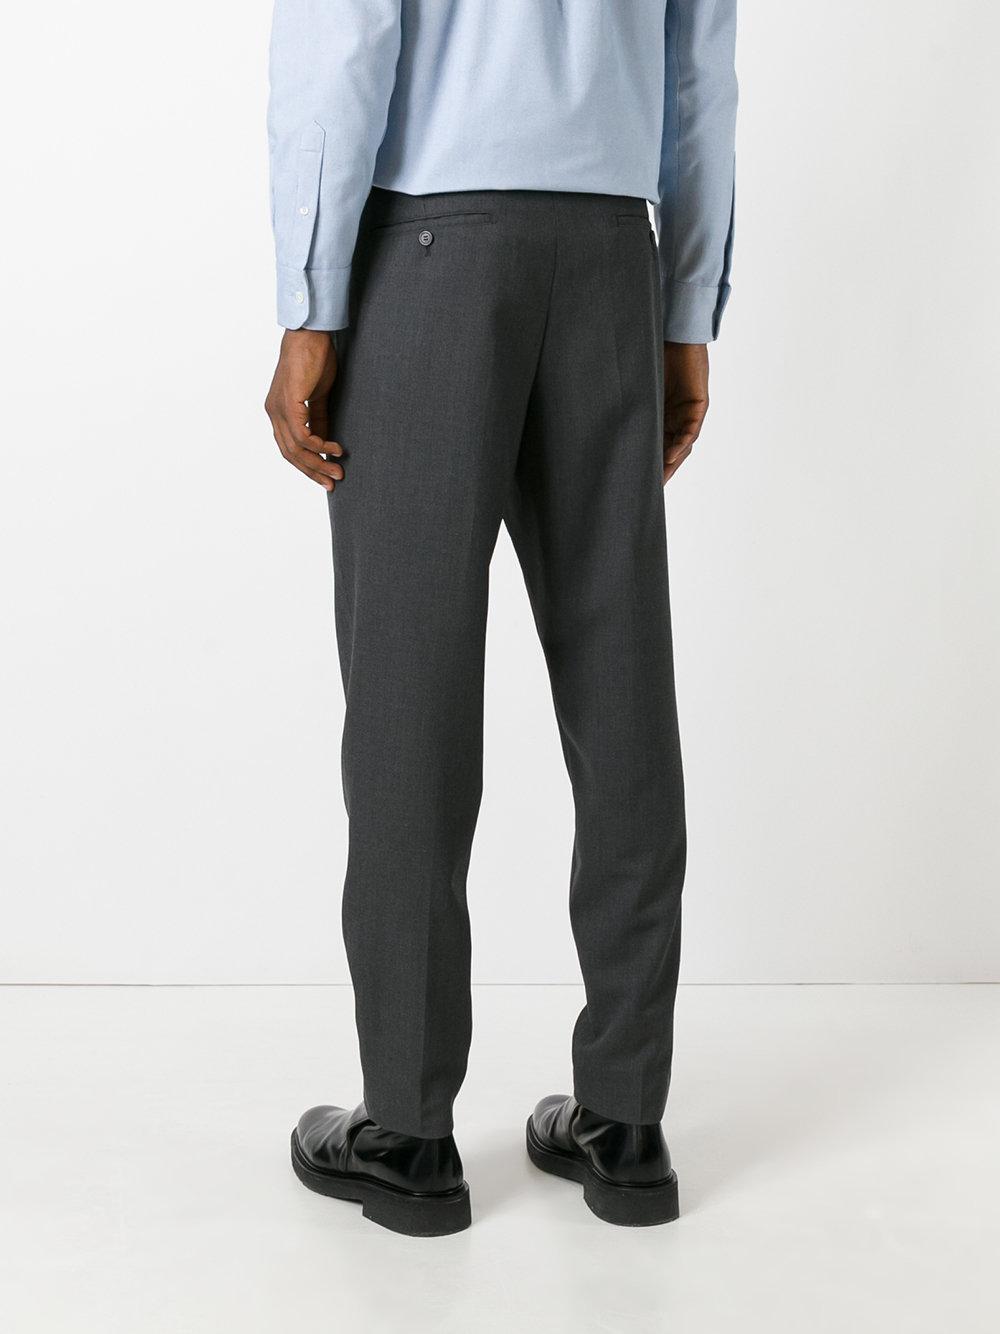 AMI Wool Carrot Fit Trousers in Grey (Gray) for Men - Lyst